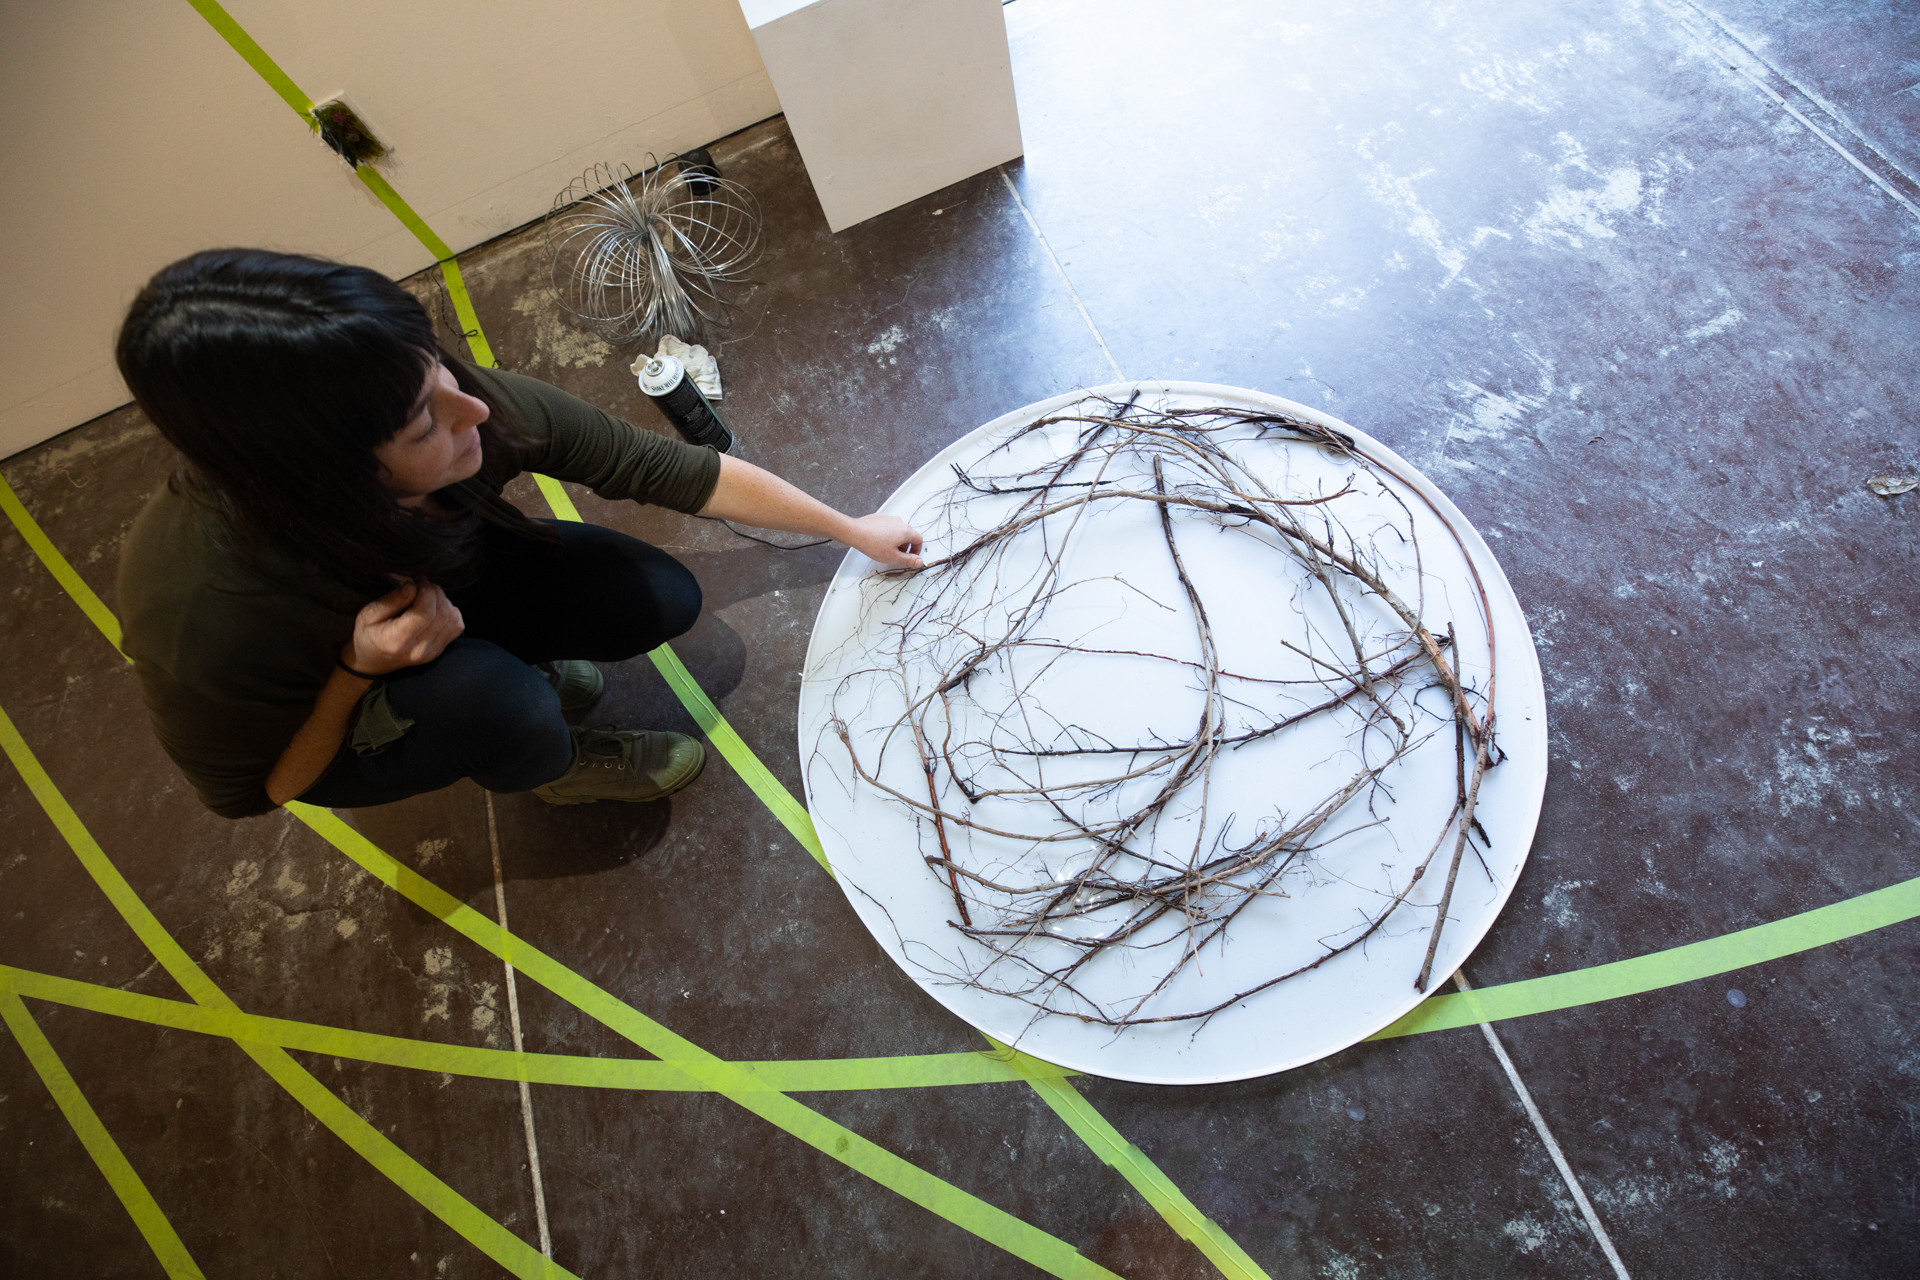 A "Pulse" exhibit artist works with her art piece on the floor of the Else Gallery at Sac State.